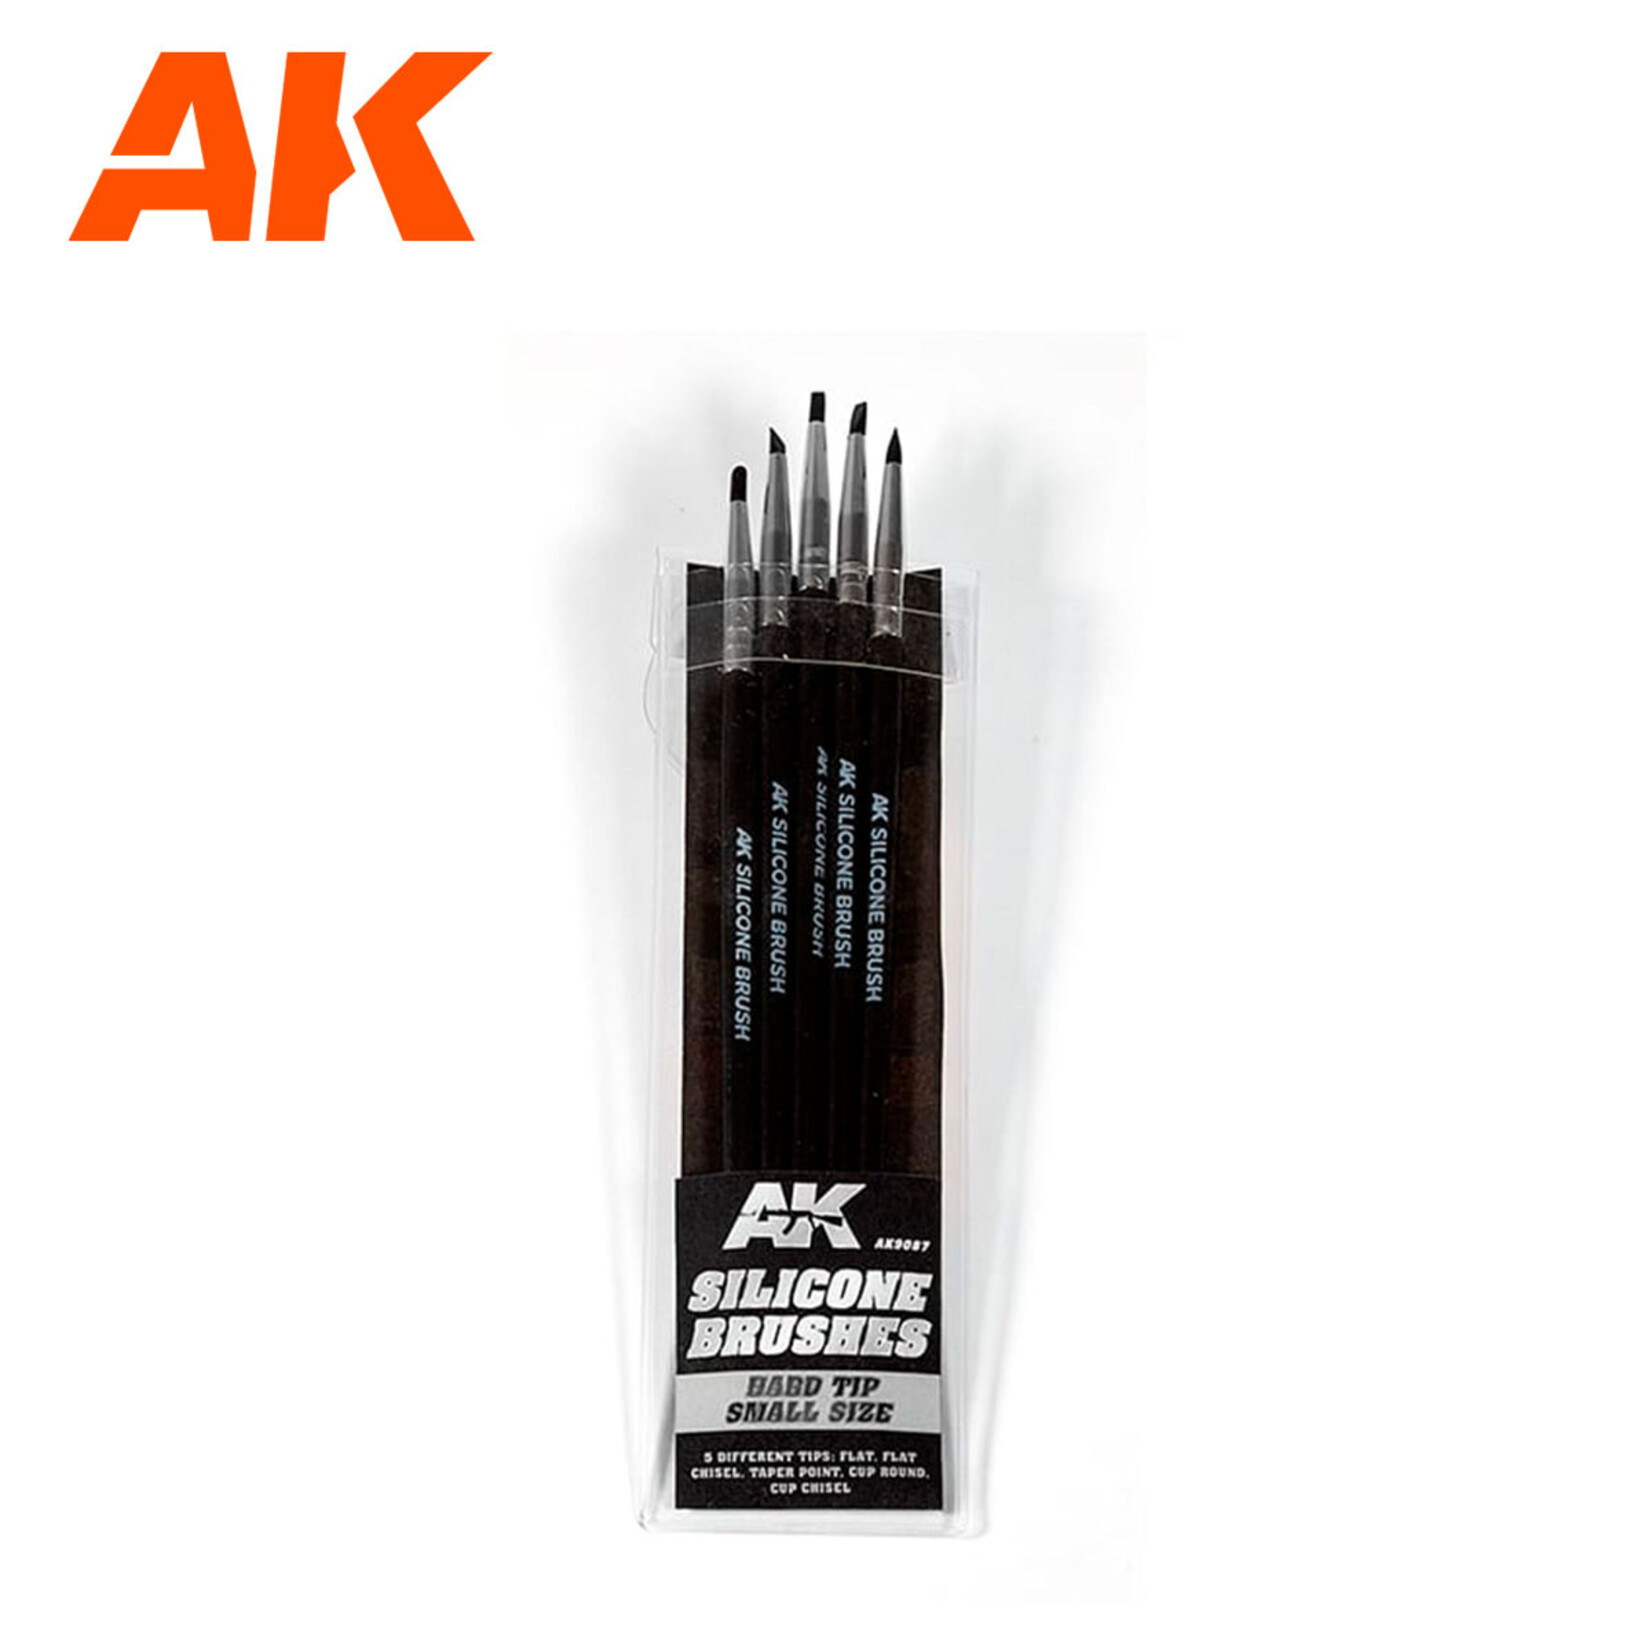 AK Interactive AK Silicone Brushes Hard Tip Small Size